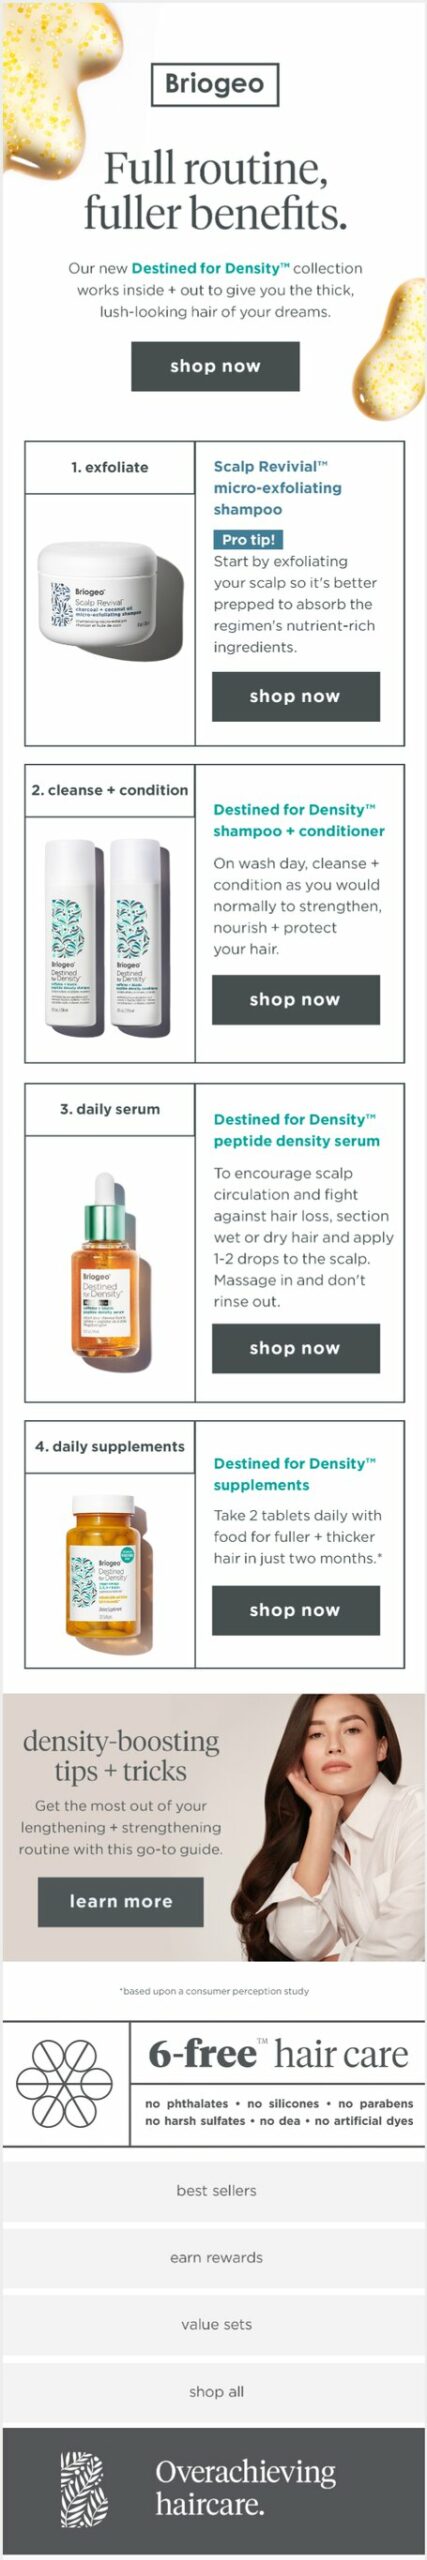 Haircare product sample promotions and deals